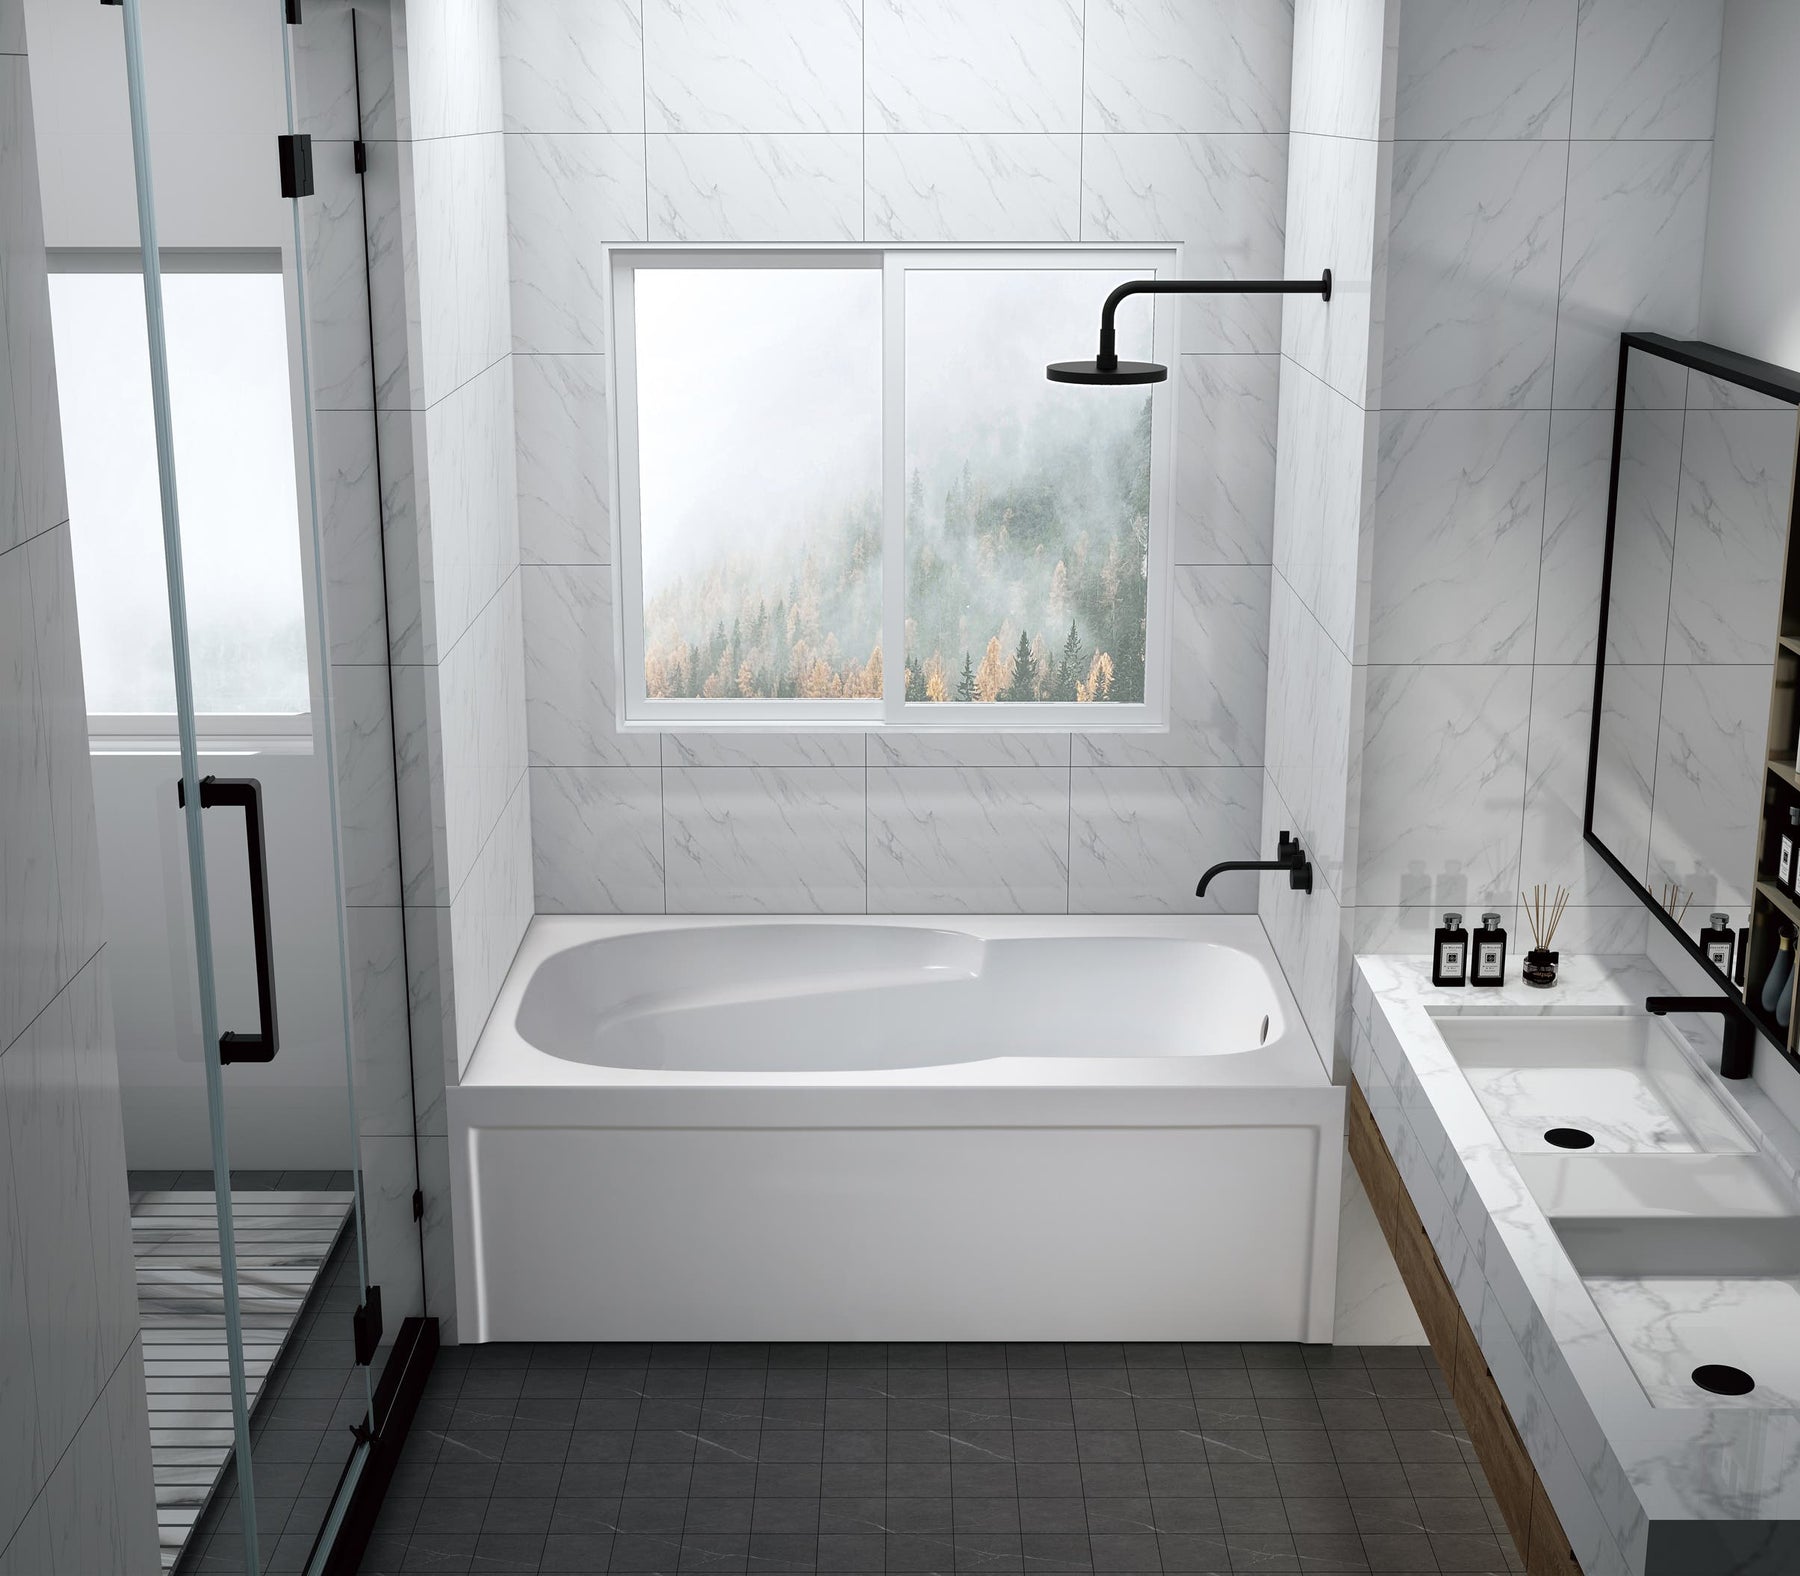 Consider an Alcove Bathtub for a Remodel